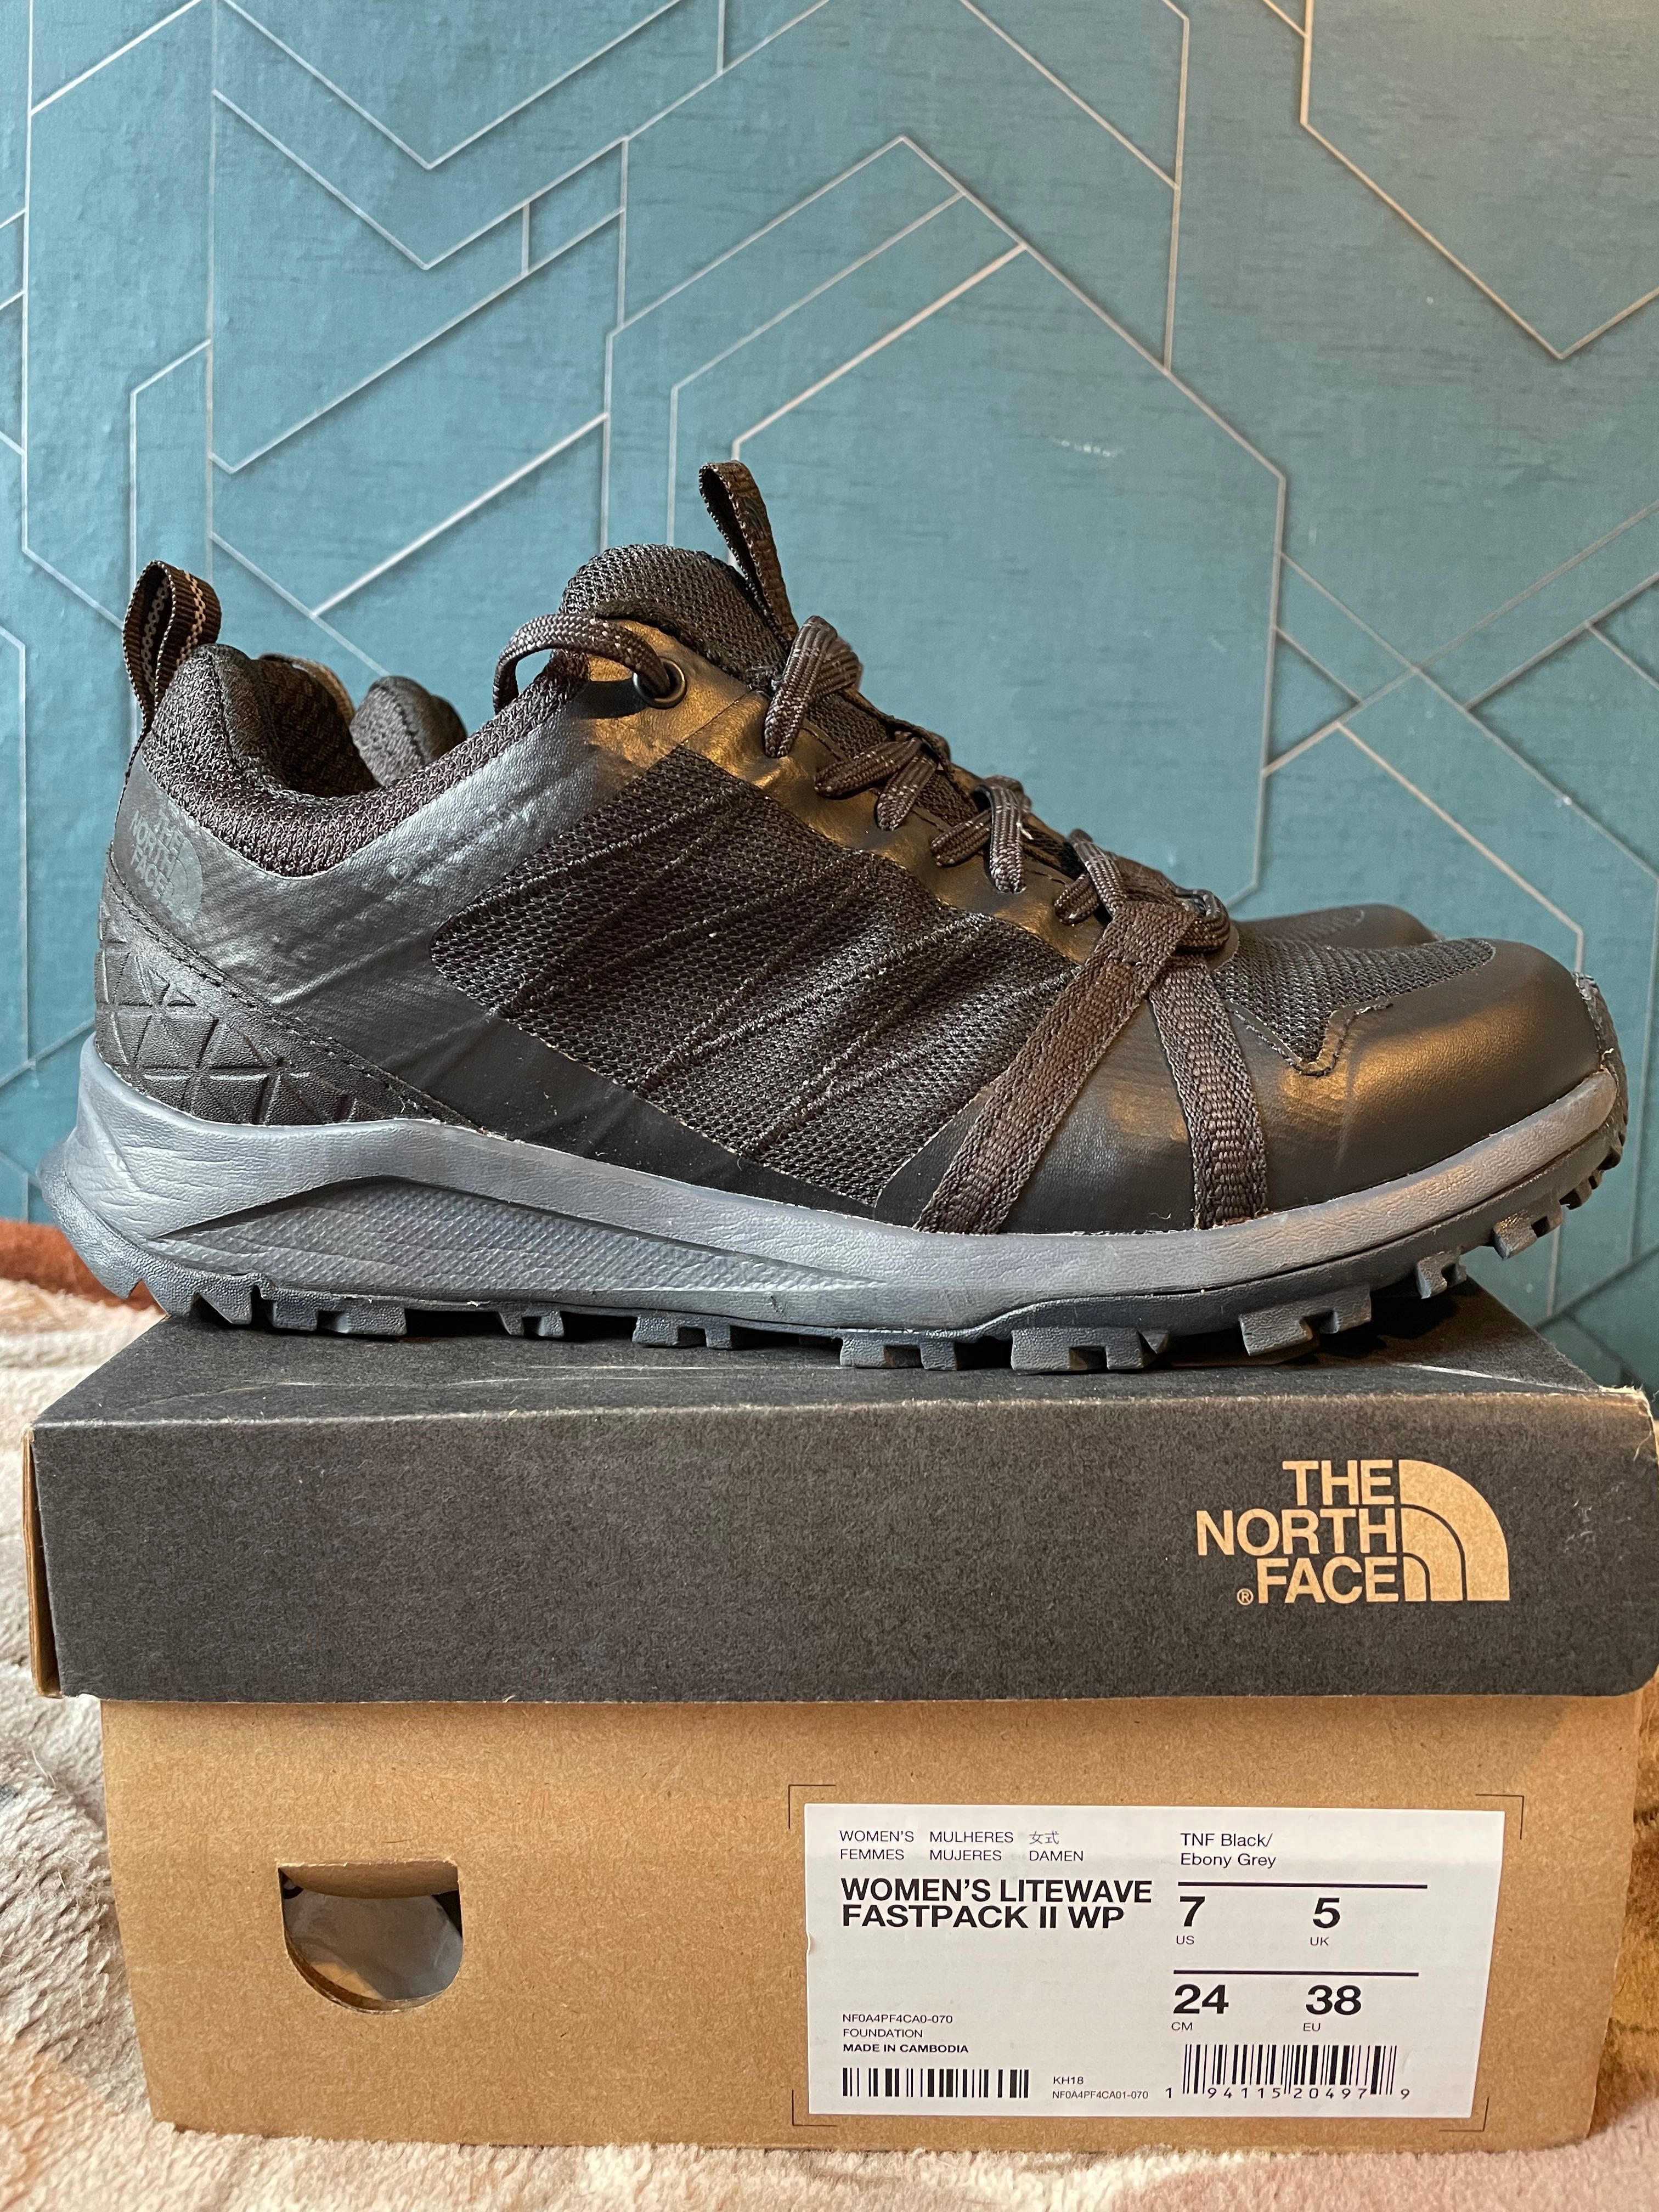 The north face buty trekkingowe 38